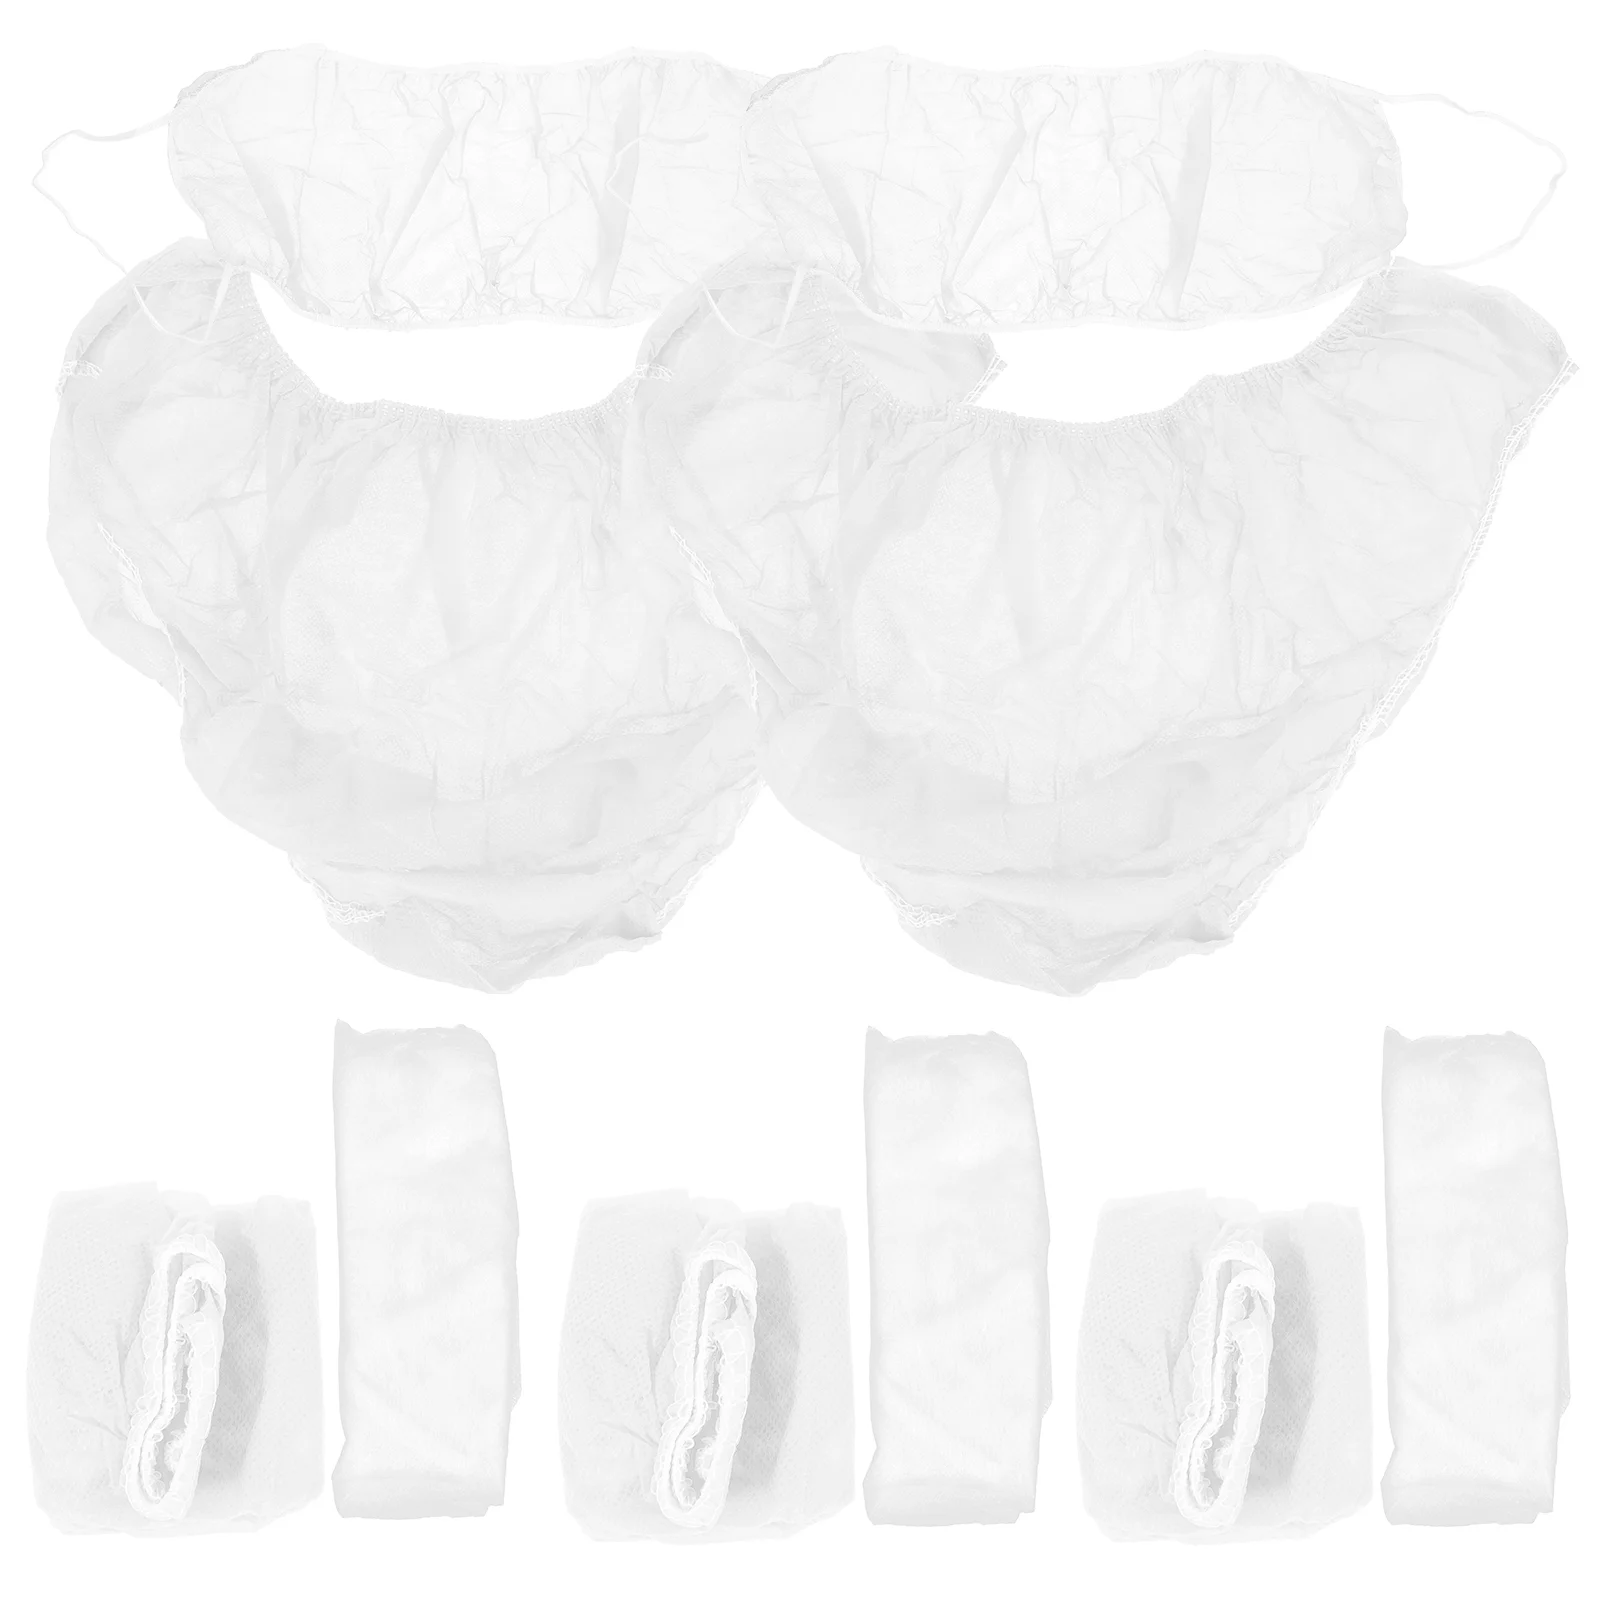 

10 Sets Sauna Panty Disposable Bras Spa Soft Briefs Non-woven Fabric Stretch Women Triangle Pants Vacation Salon